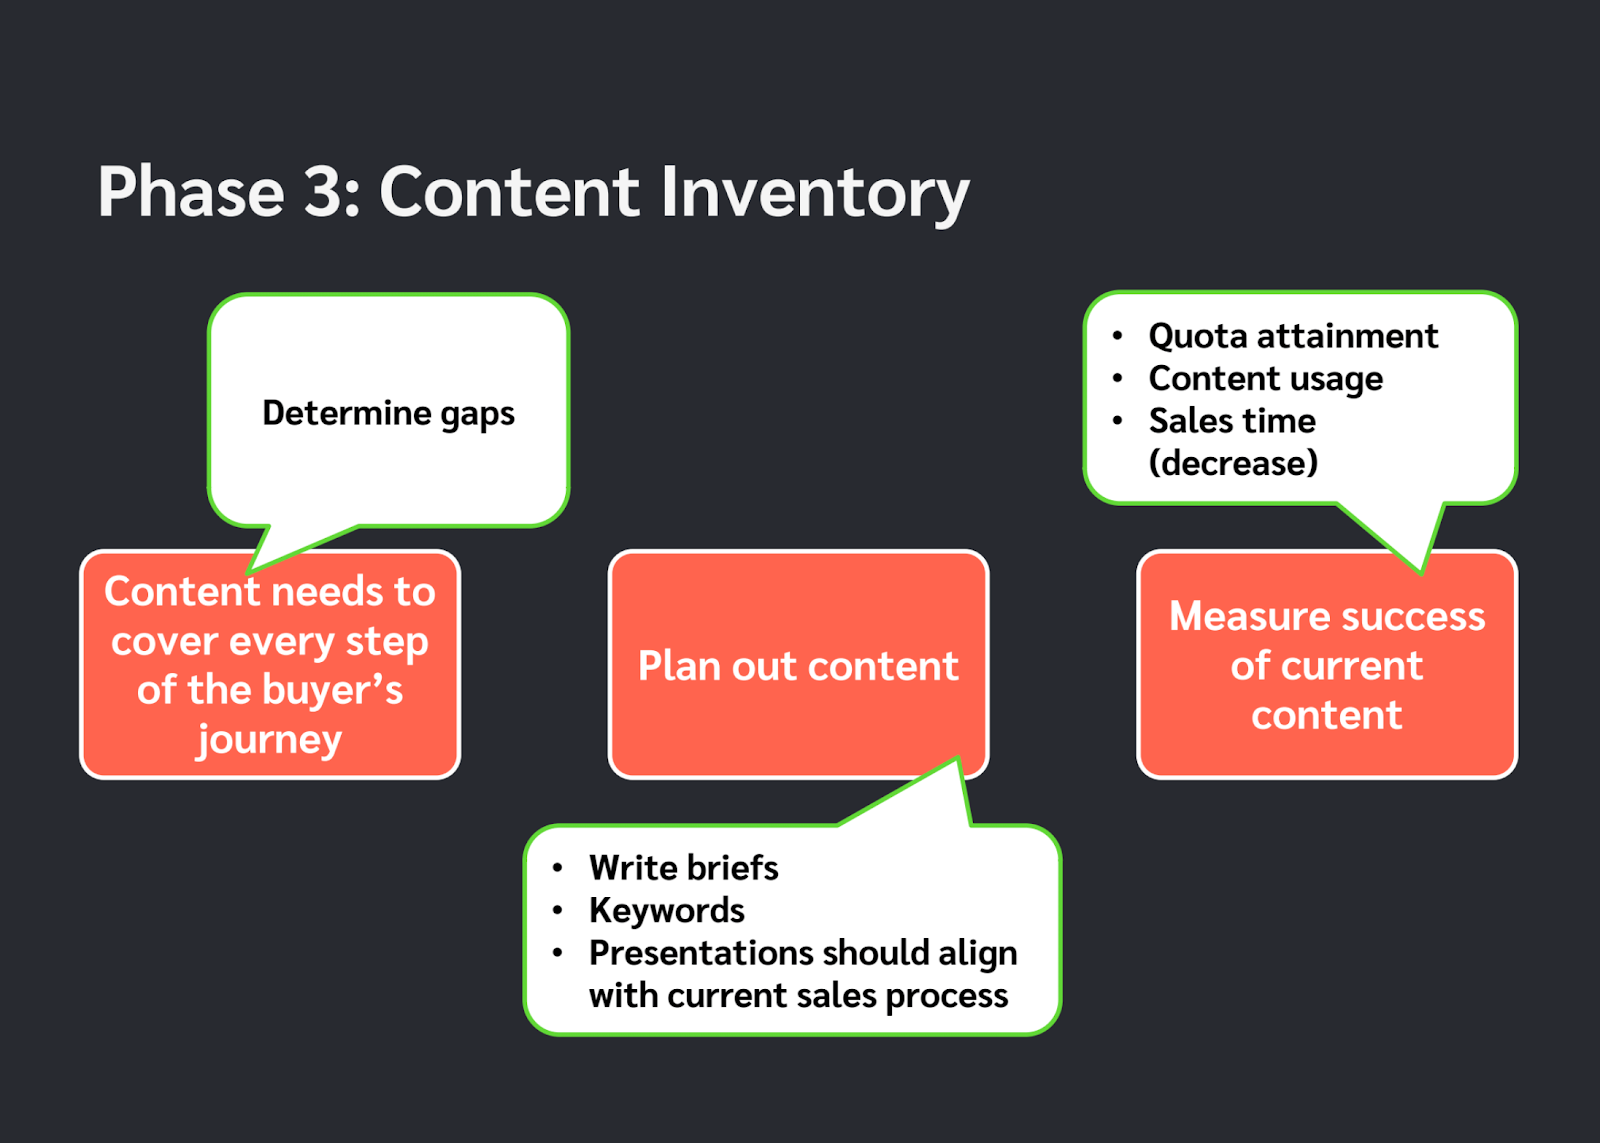 Build out your content inventory to supplement sales enablement.